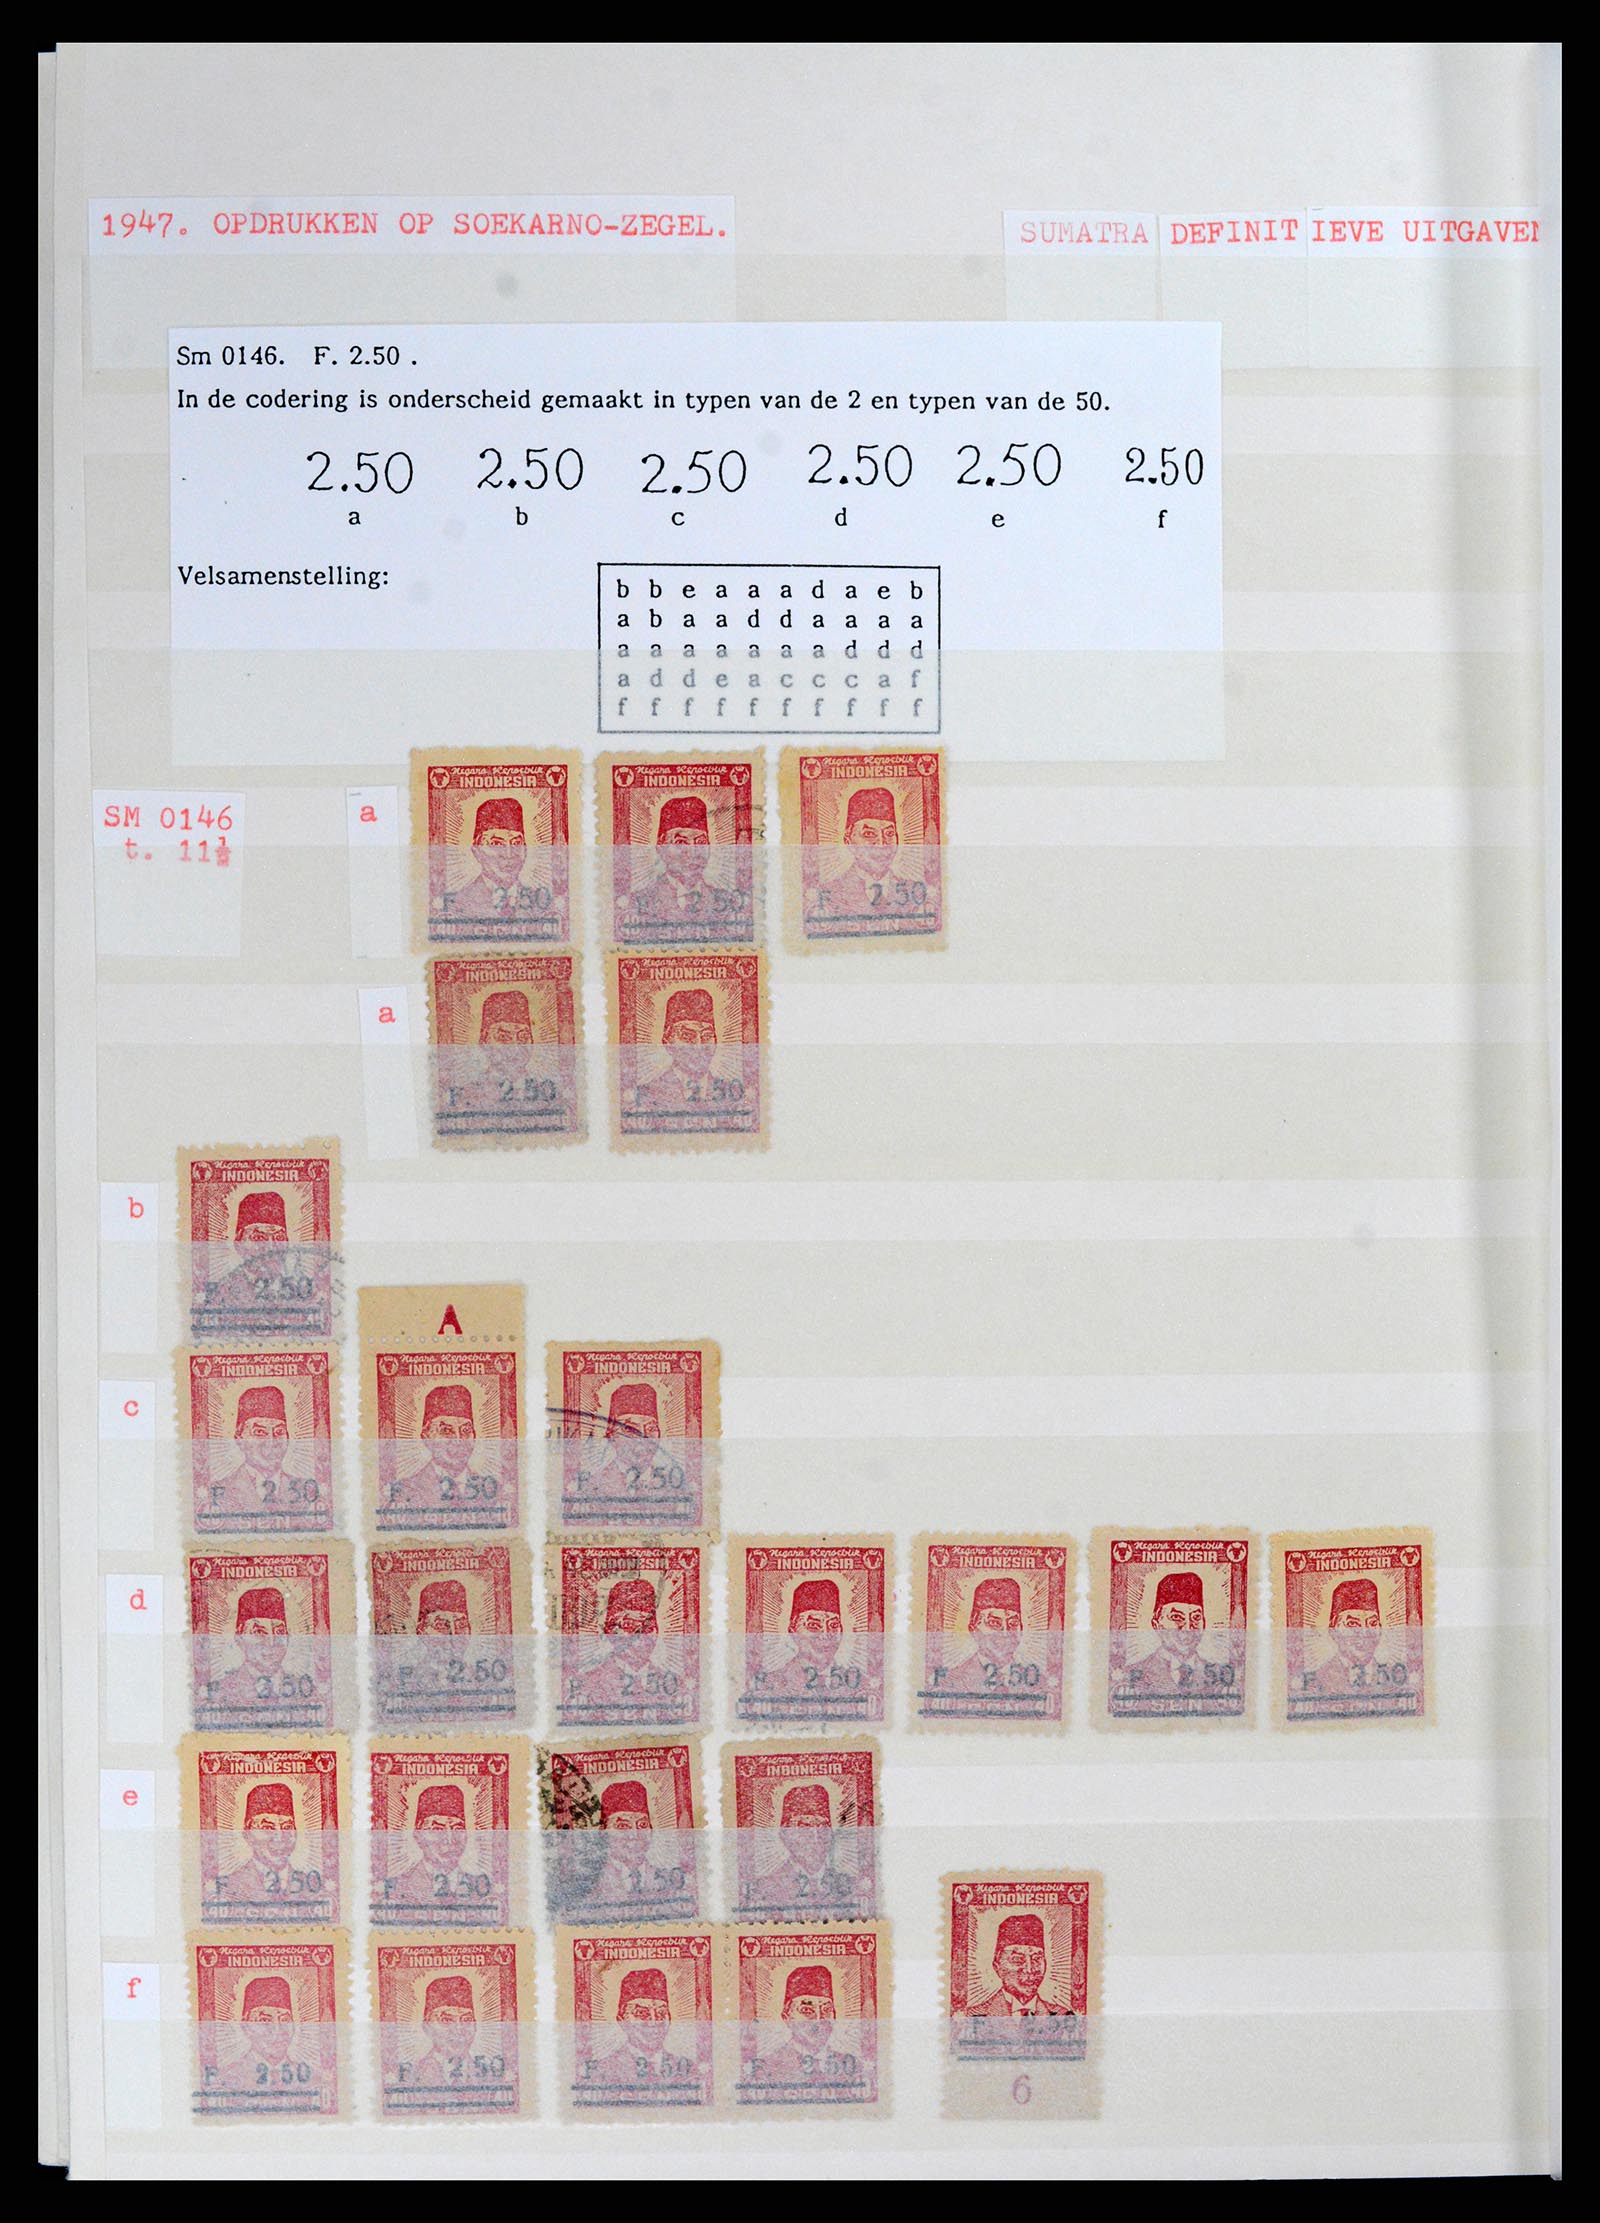 37692 124 - Stamp collection 37692 Indonesia interimperiod 1945-1499.